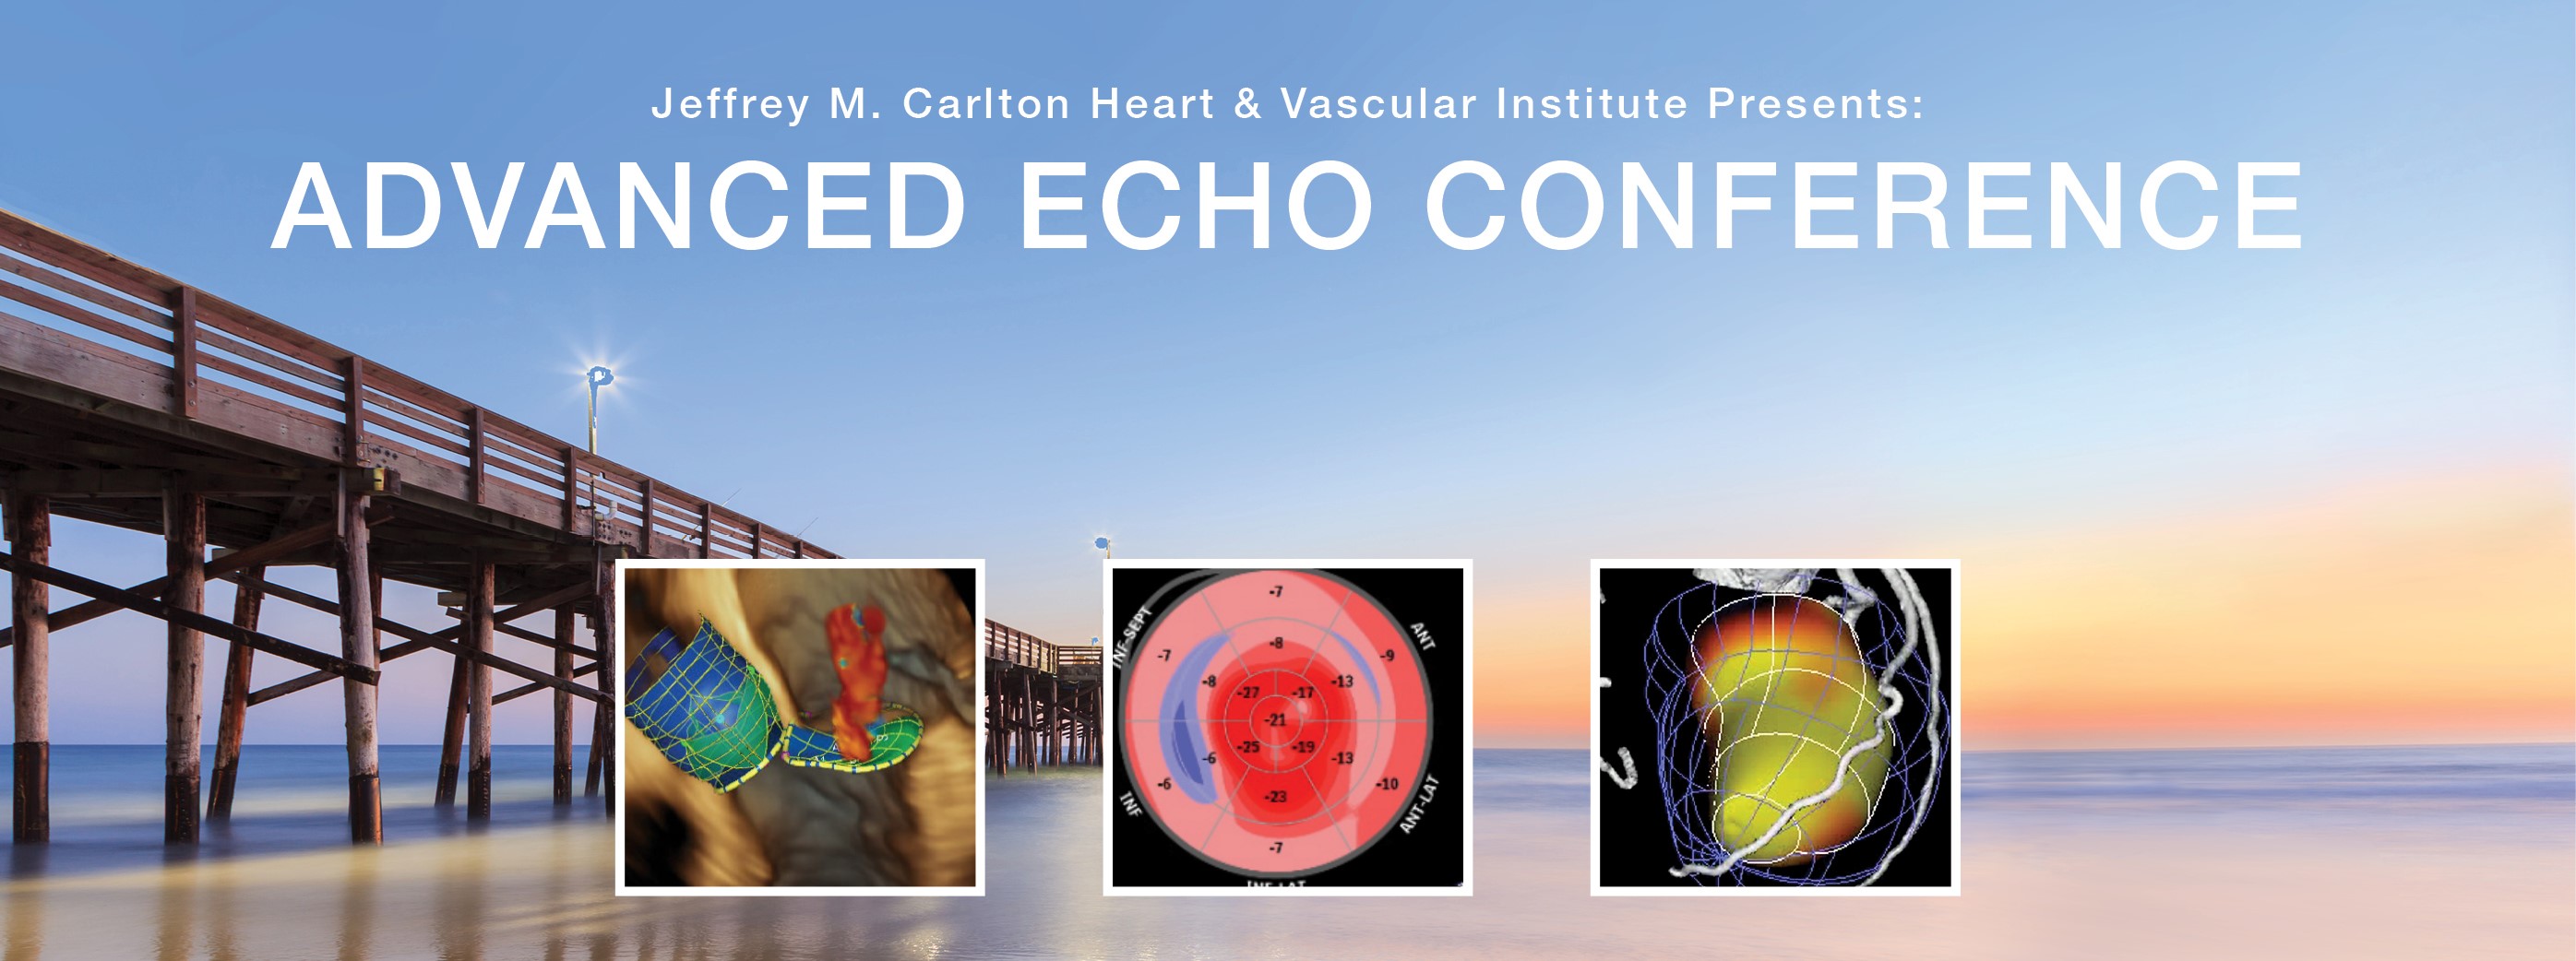 37th Advanced Echo Conference Banner